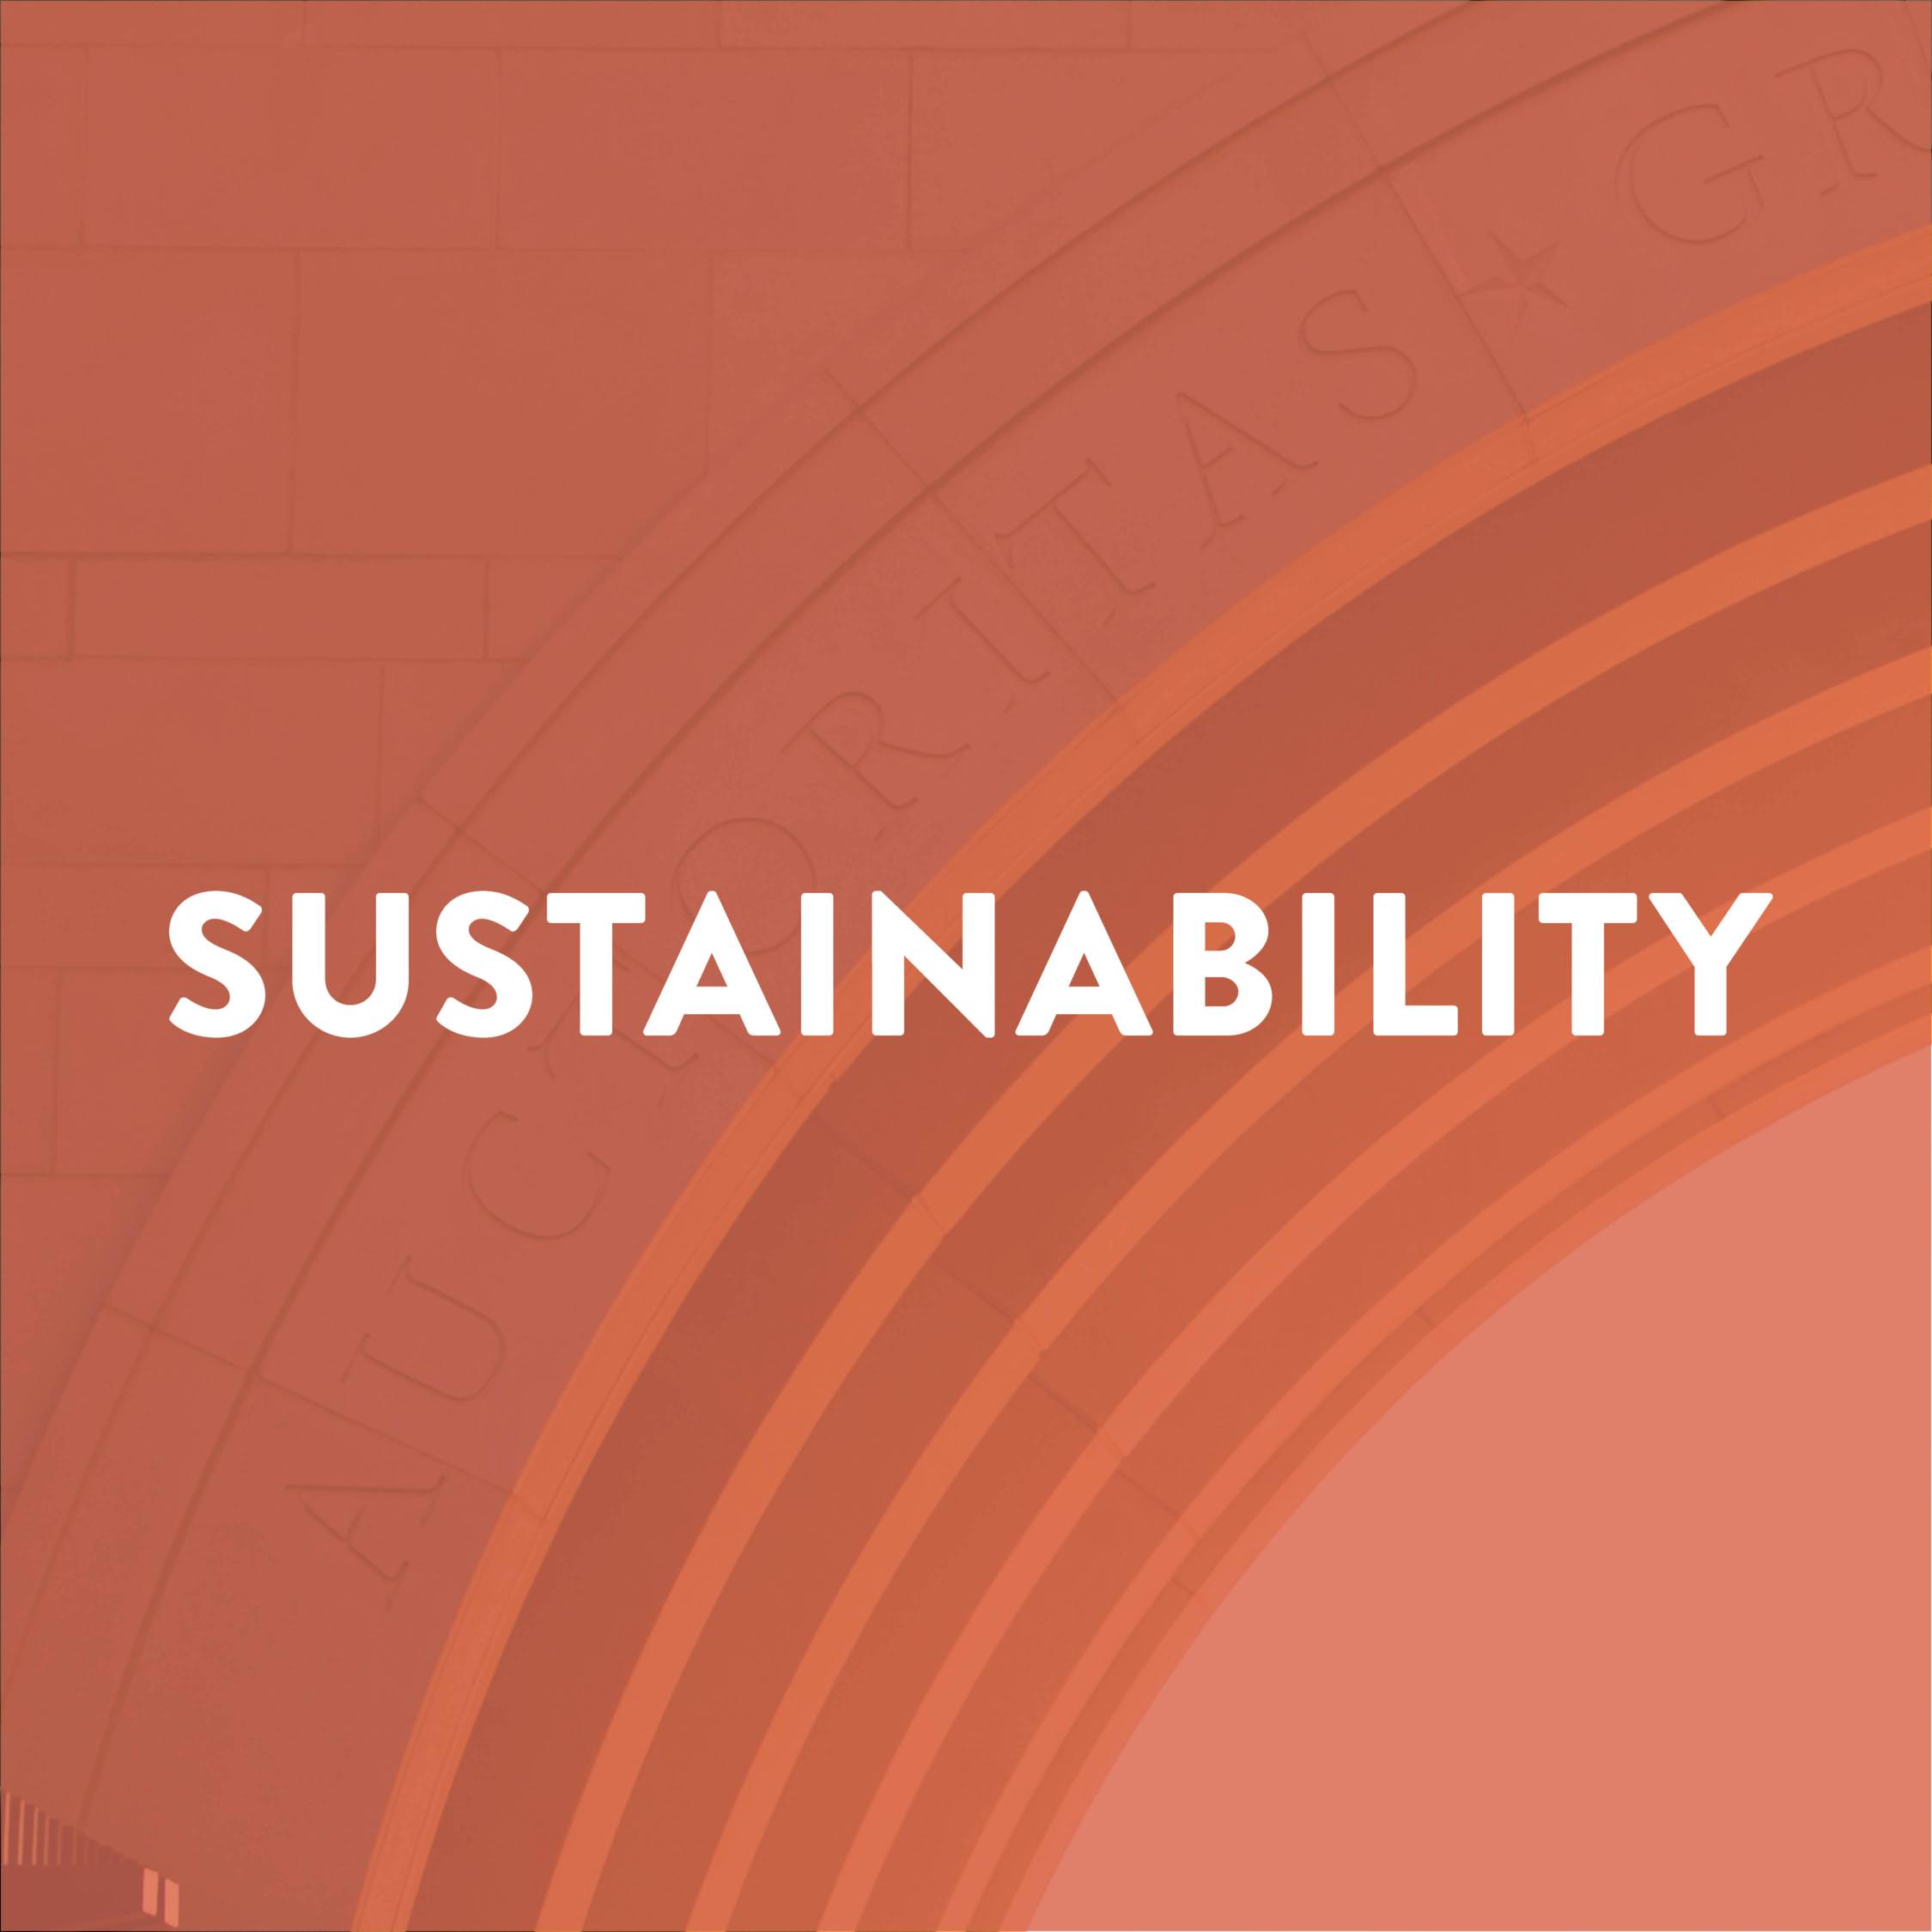 Click here to learn more about the MPA program's sustainability initiative.